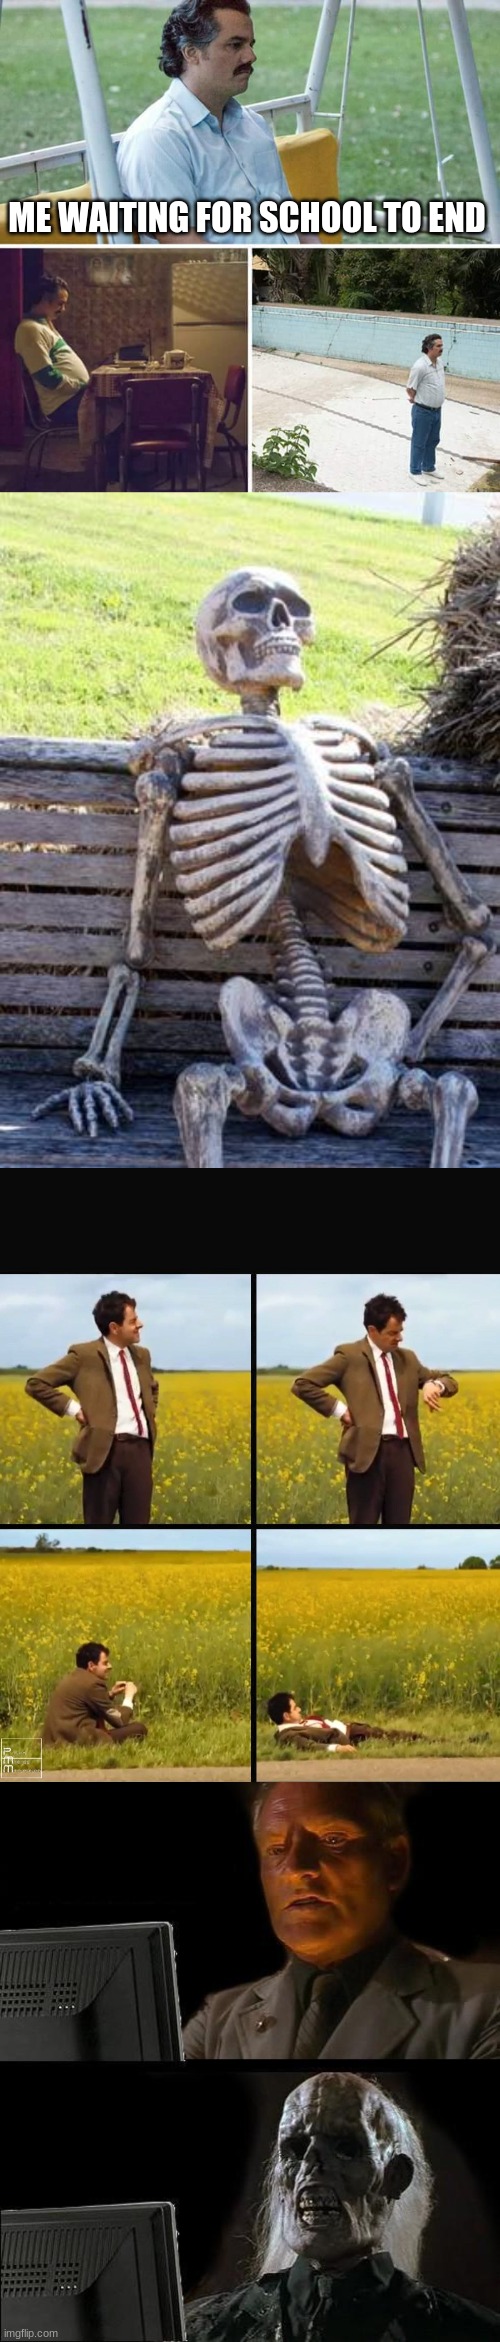 upvote if u think this is true (I think it is) | ME WAITING FOR SCHOOL TO END | image tagged in memes,sad pablo escobar,waiting skeleton,mr bean waiting,i'll just wait here | made w/ Imgflip meme maker